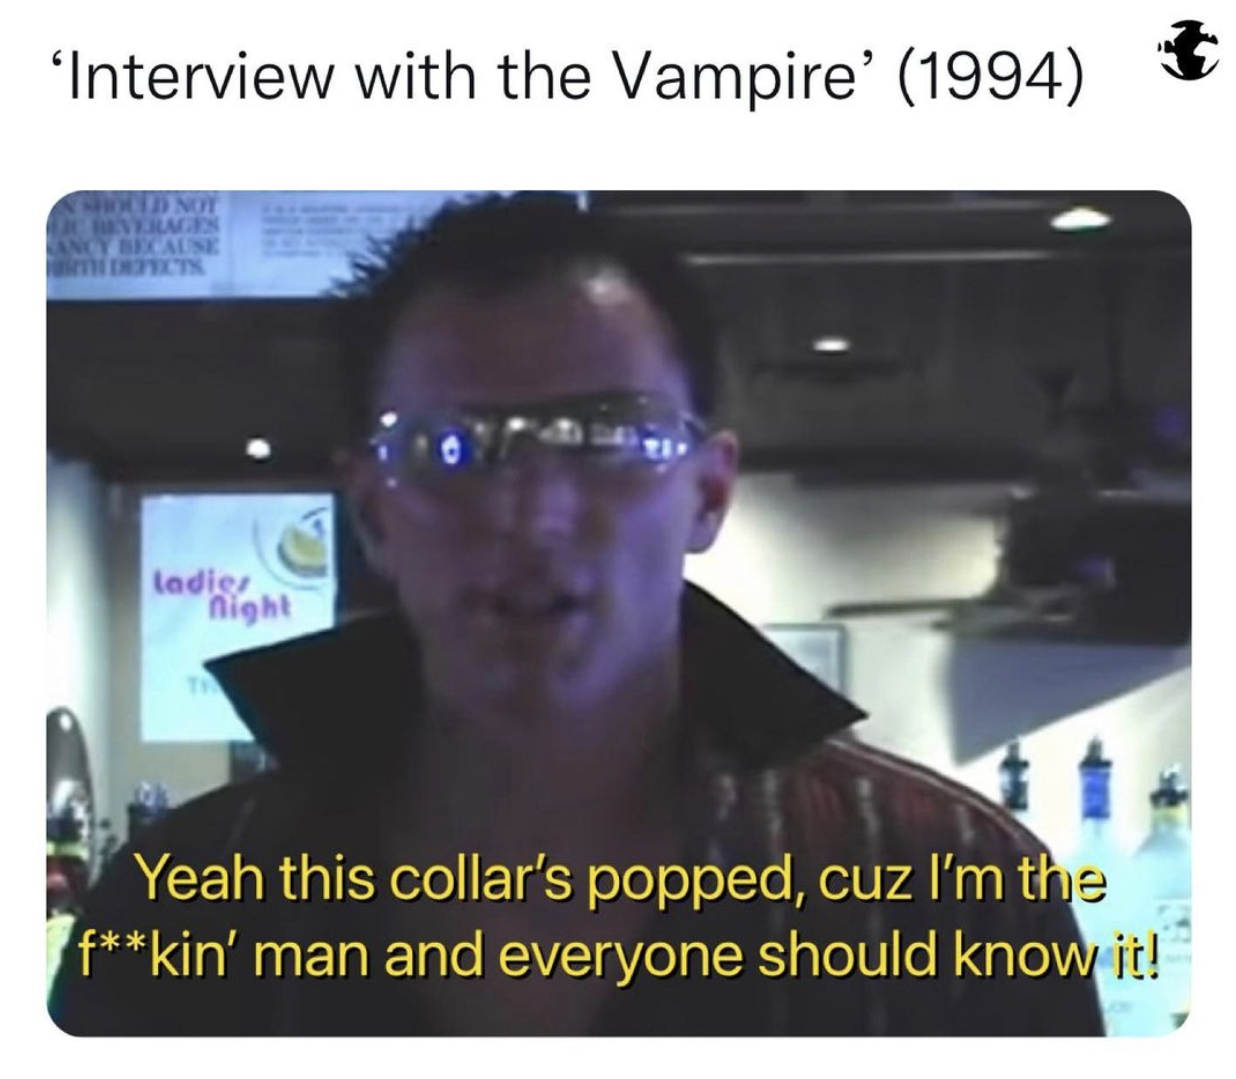 eBaum's World original memes - display device - 'Interview with the Vampire' 1994 Chould Not Efects Ladies night Yeah this collar's popped, cuz I'm the fkin' man and everyone should know it!